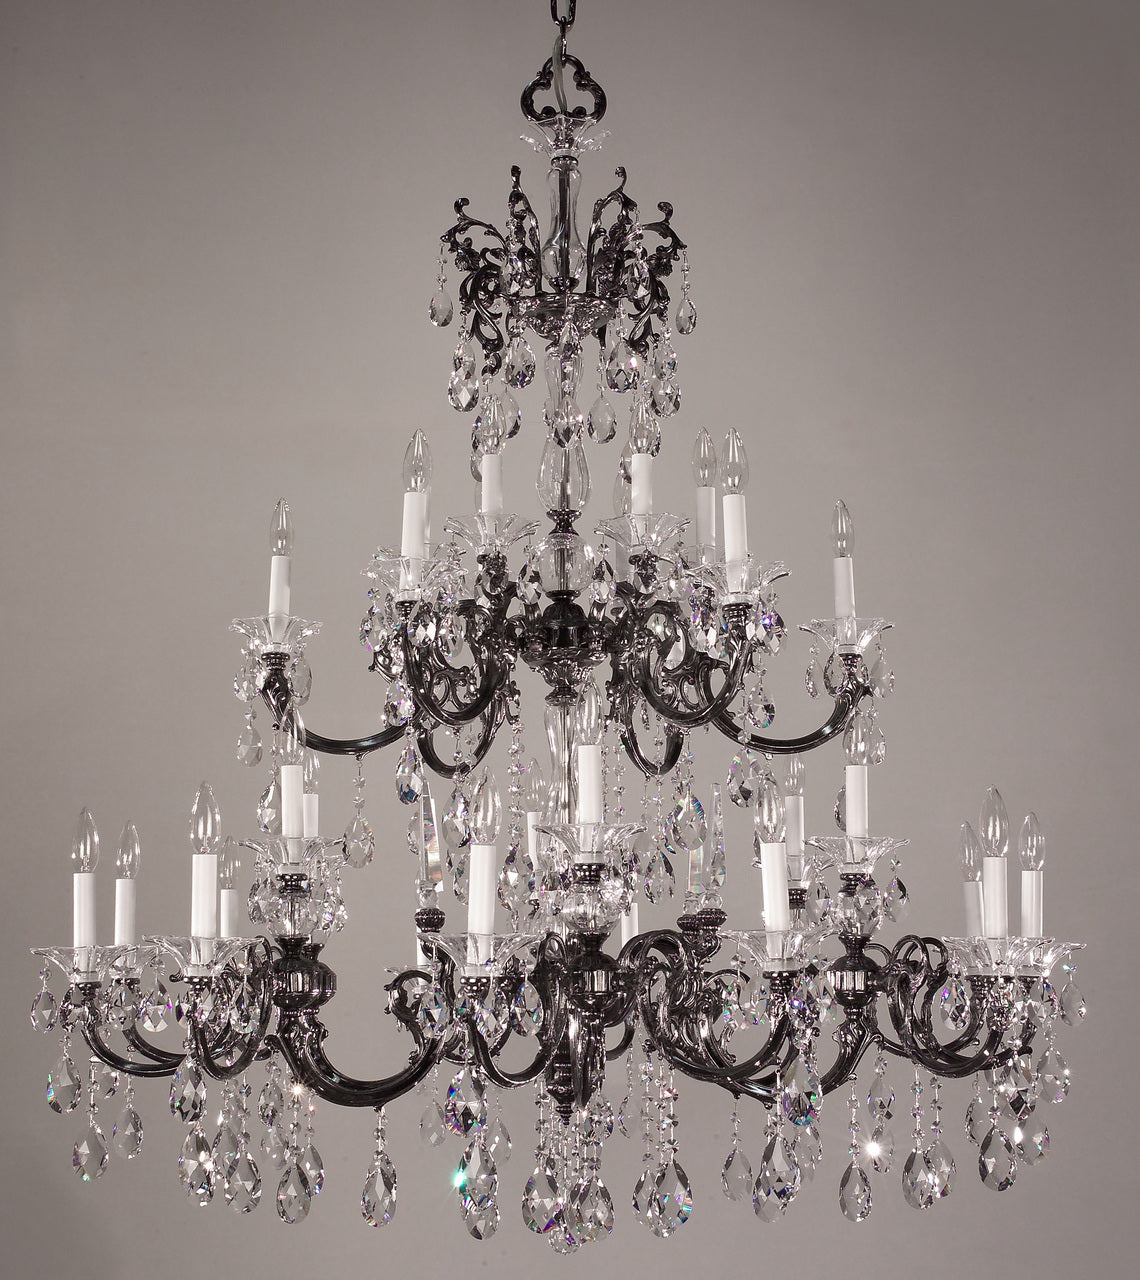 Classic Lighting 57060 G S Via Lombardi Crystal Chandelier in 24k Gold (Imported from Spain)